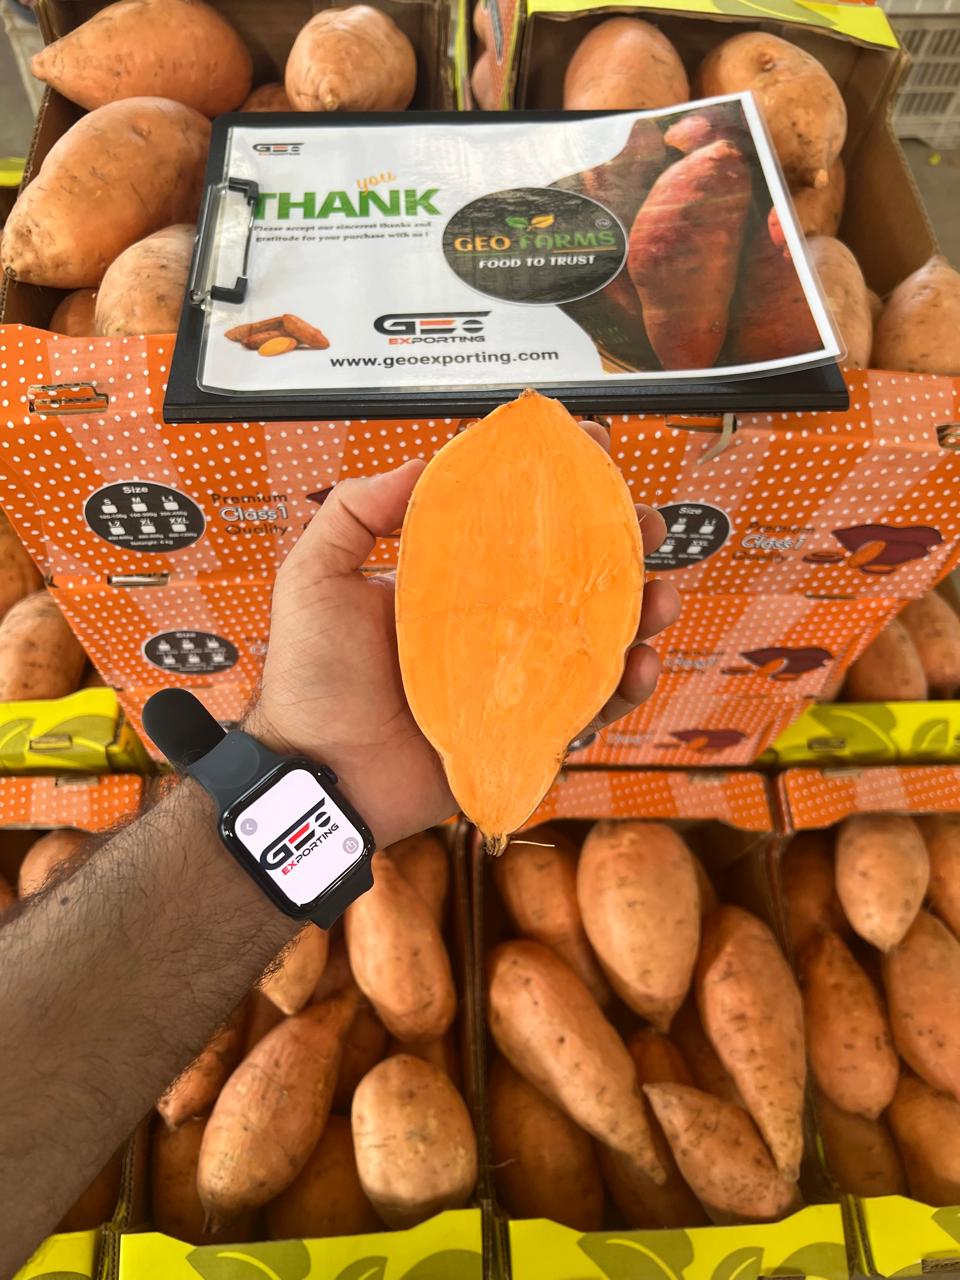 Bellevue Sweet Potatoes - Exported from Egypt